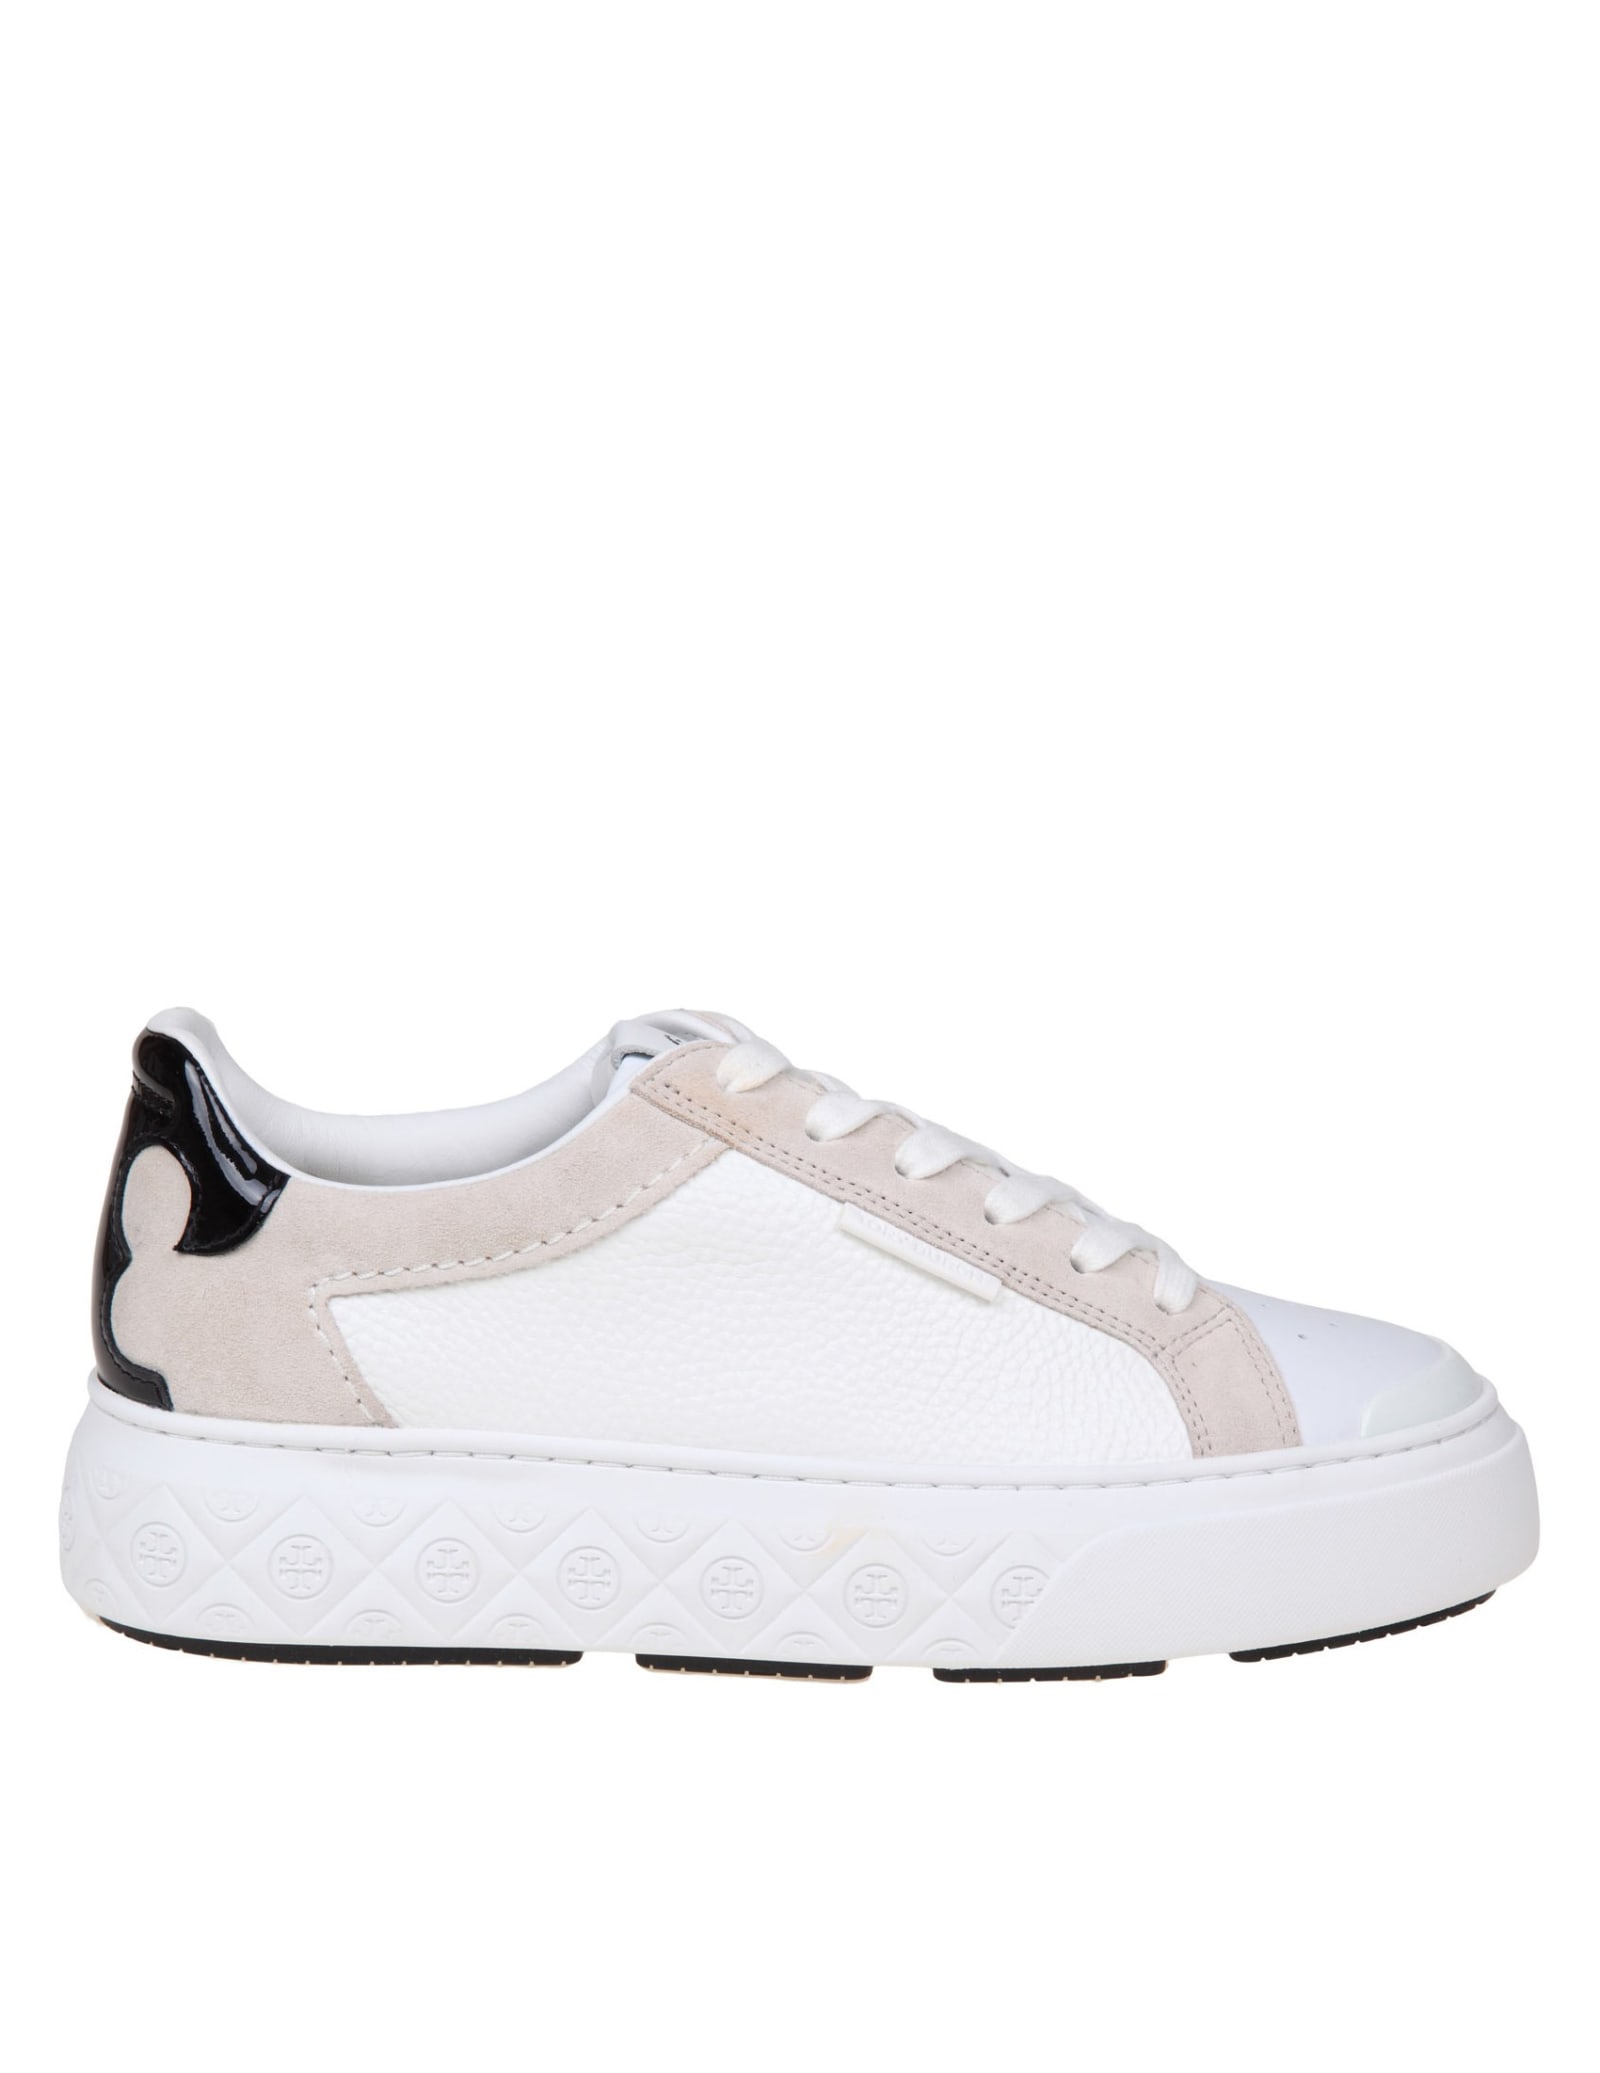 Tory Burch Ladybug Sneakers In Black And White Leather In White/black